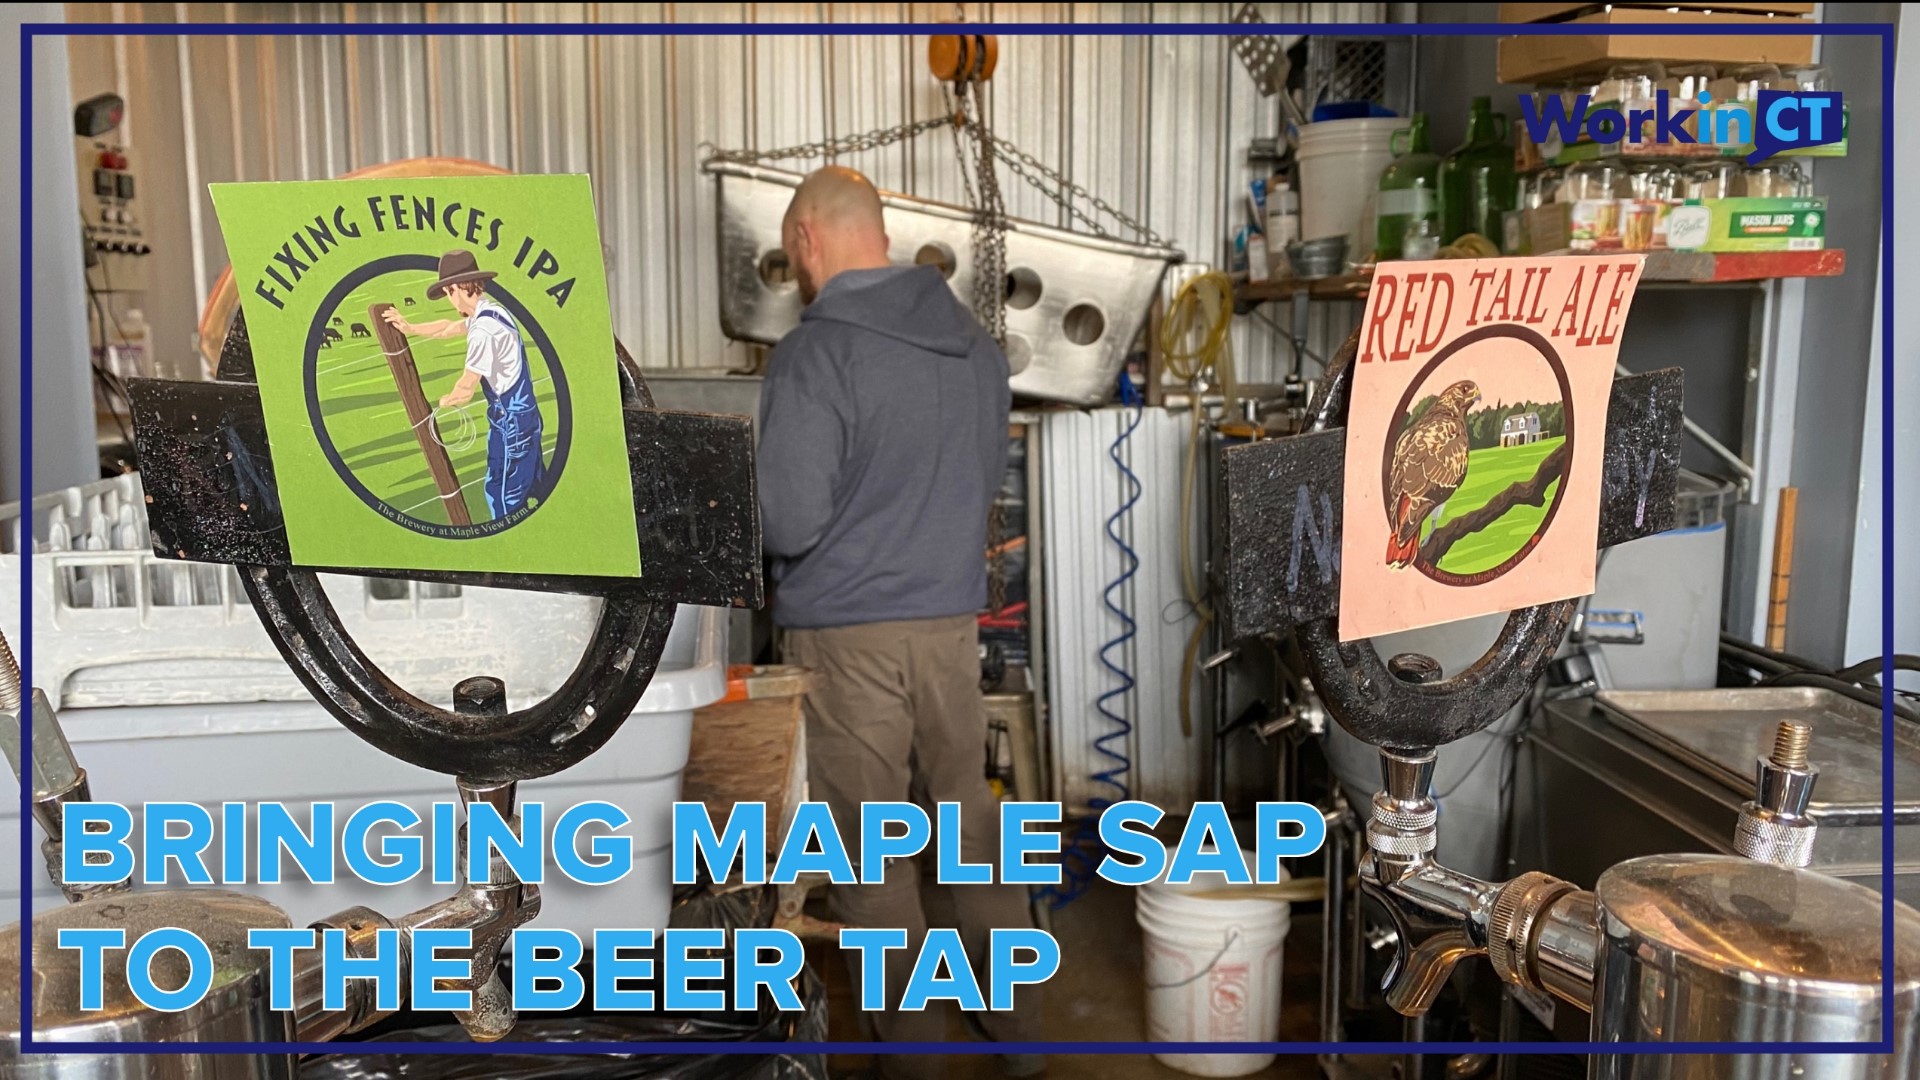 The Maple Ale comes from the creative mind of head brewer John Coppeler who said they make the most of what is on the farm.